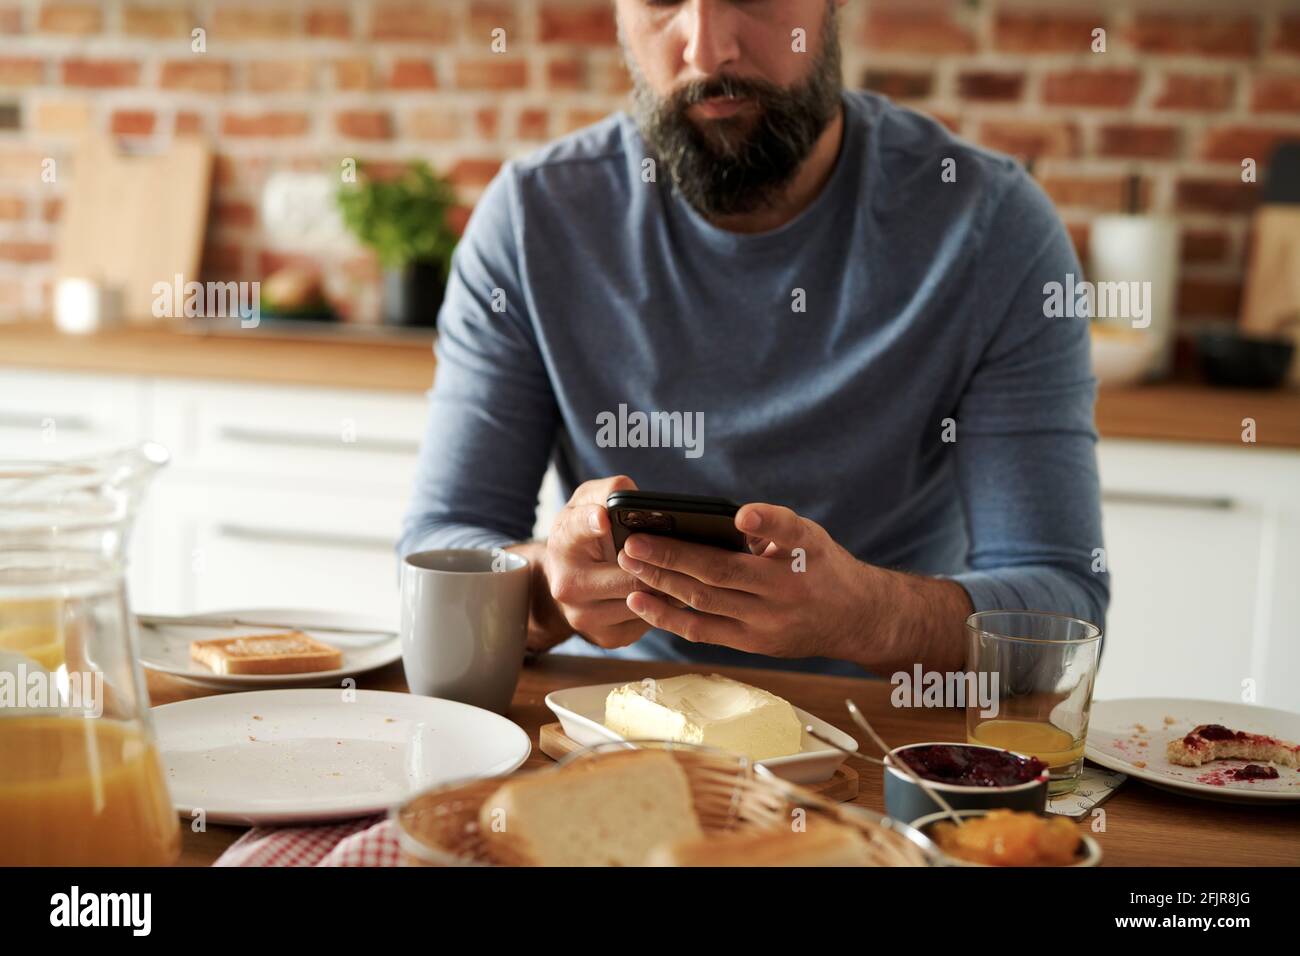 Close up of man using mobile phone during breakfast Stock Photo